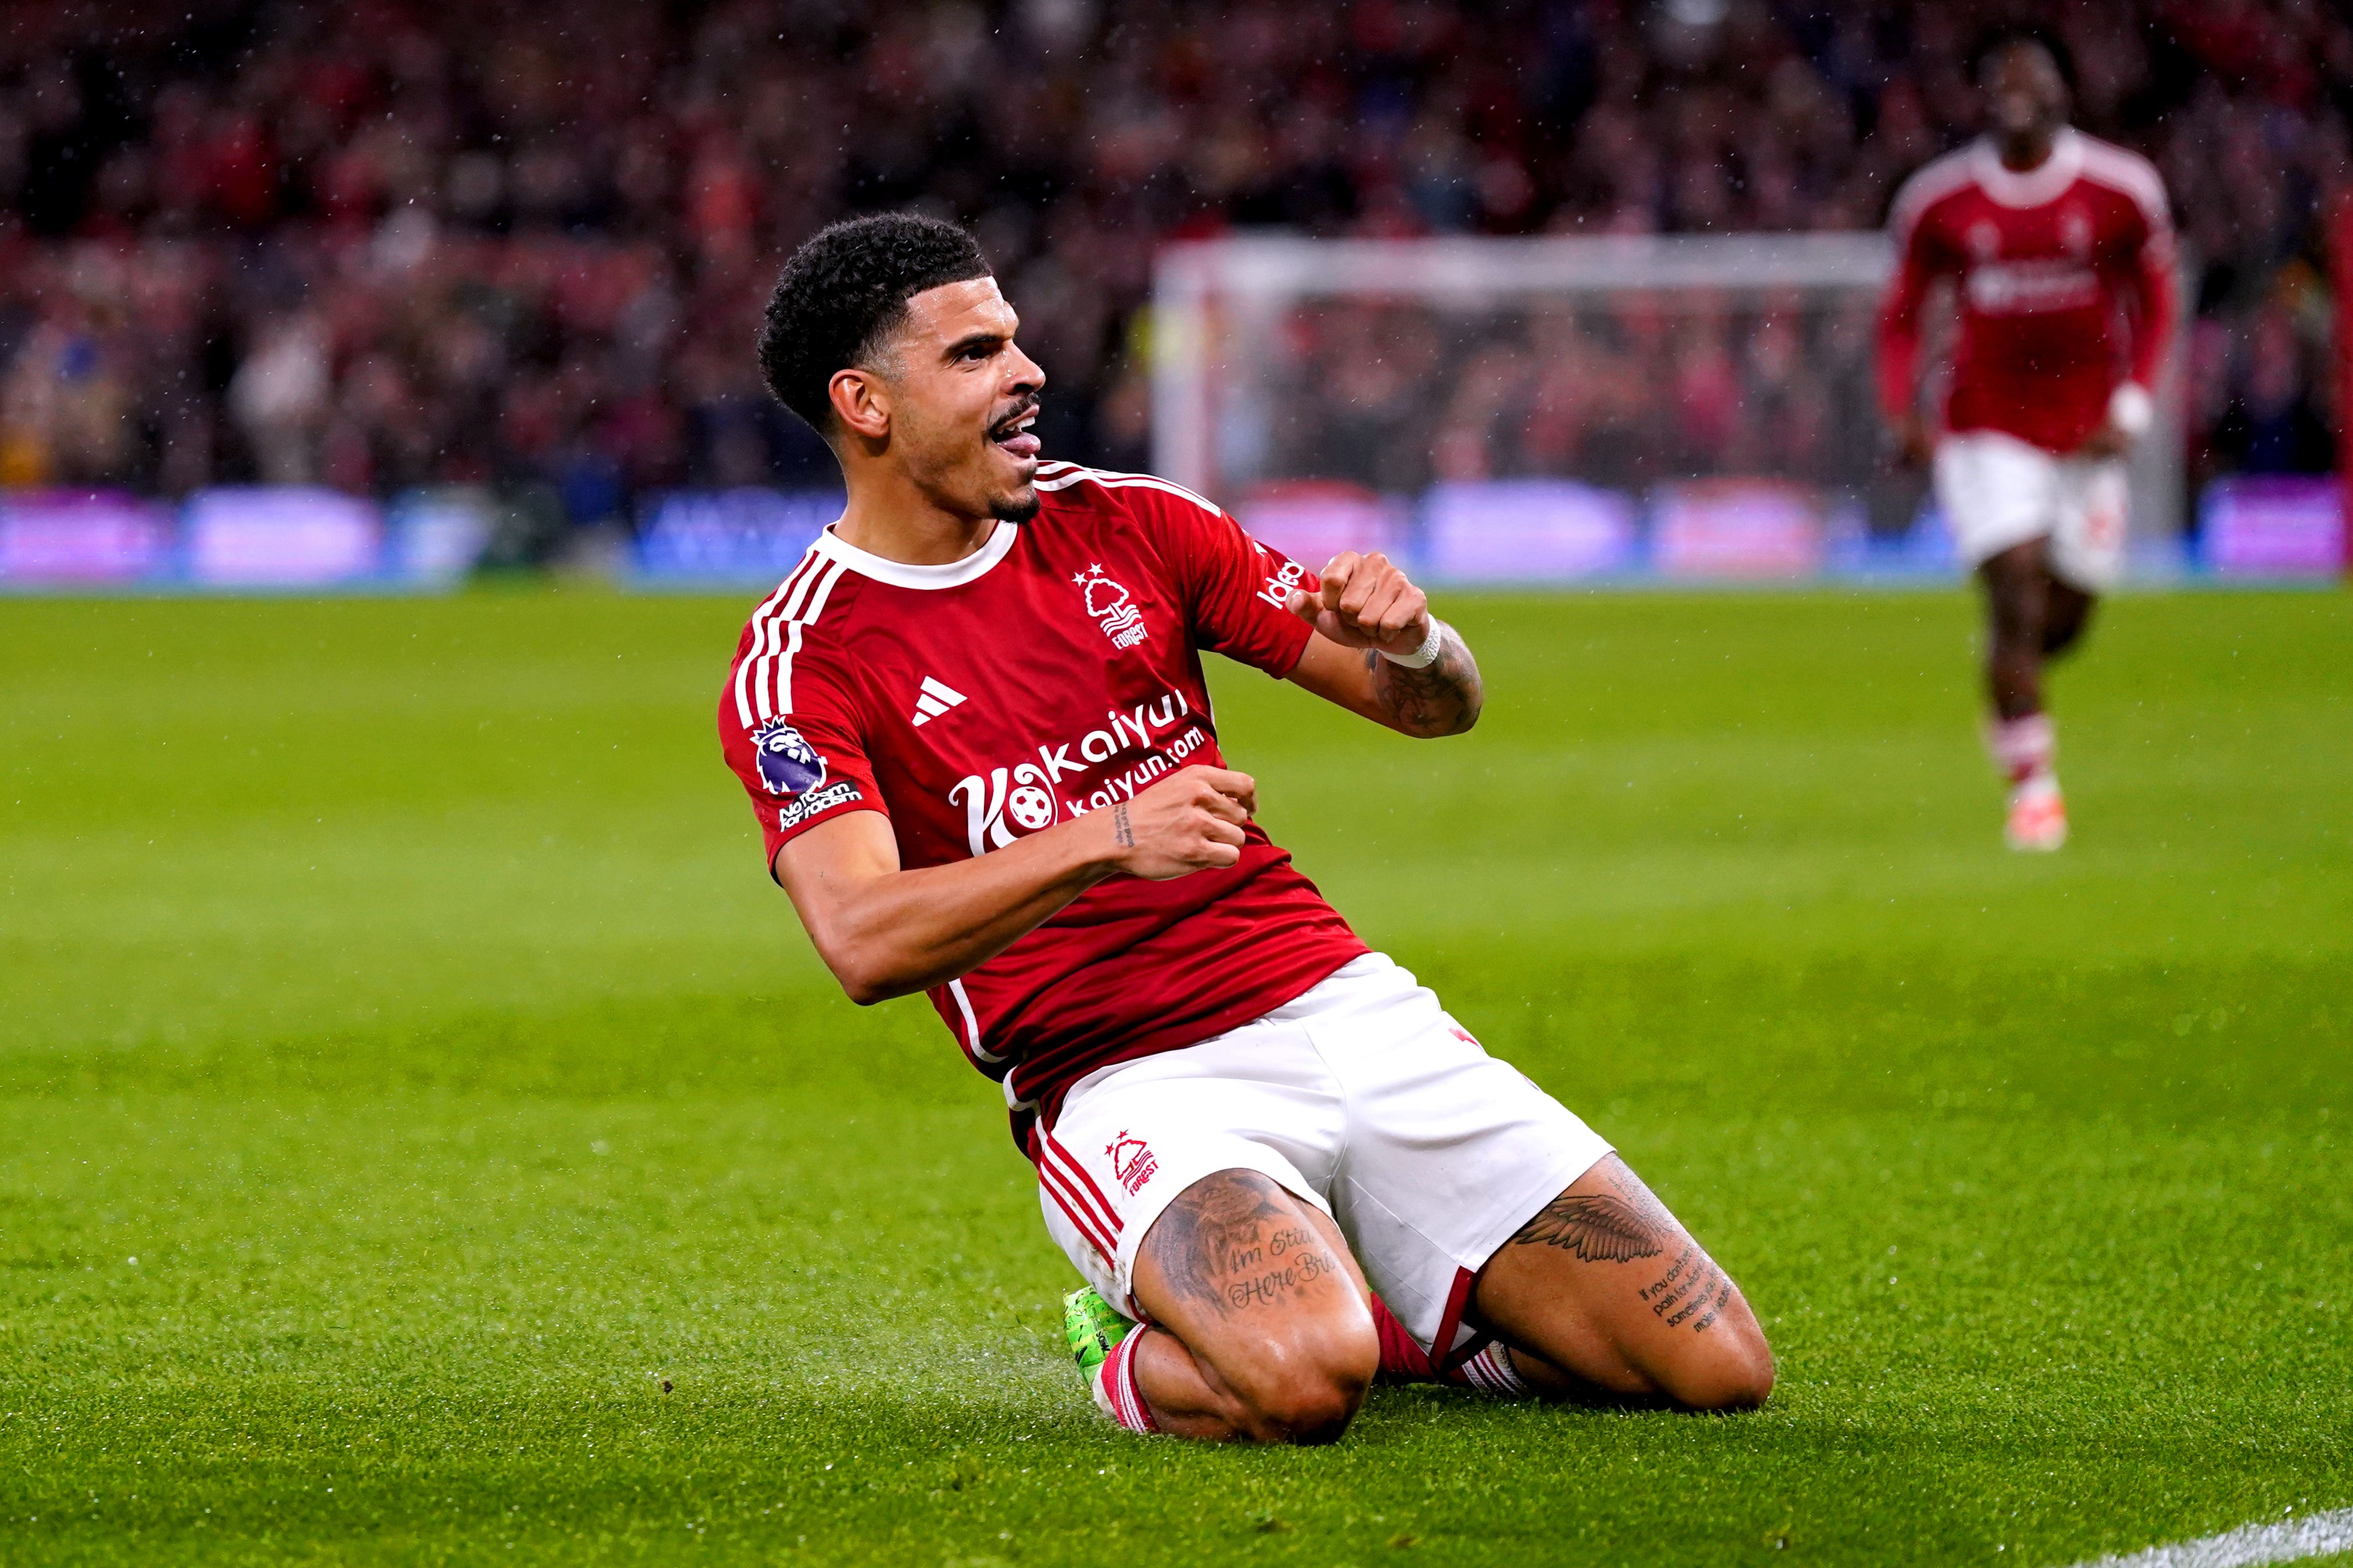 Morgan Gibbs-White was at the heart of everything Forest did well (Bradley Collyer/PA)